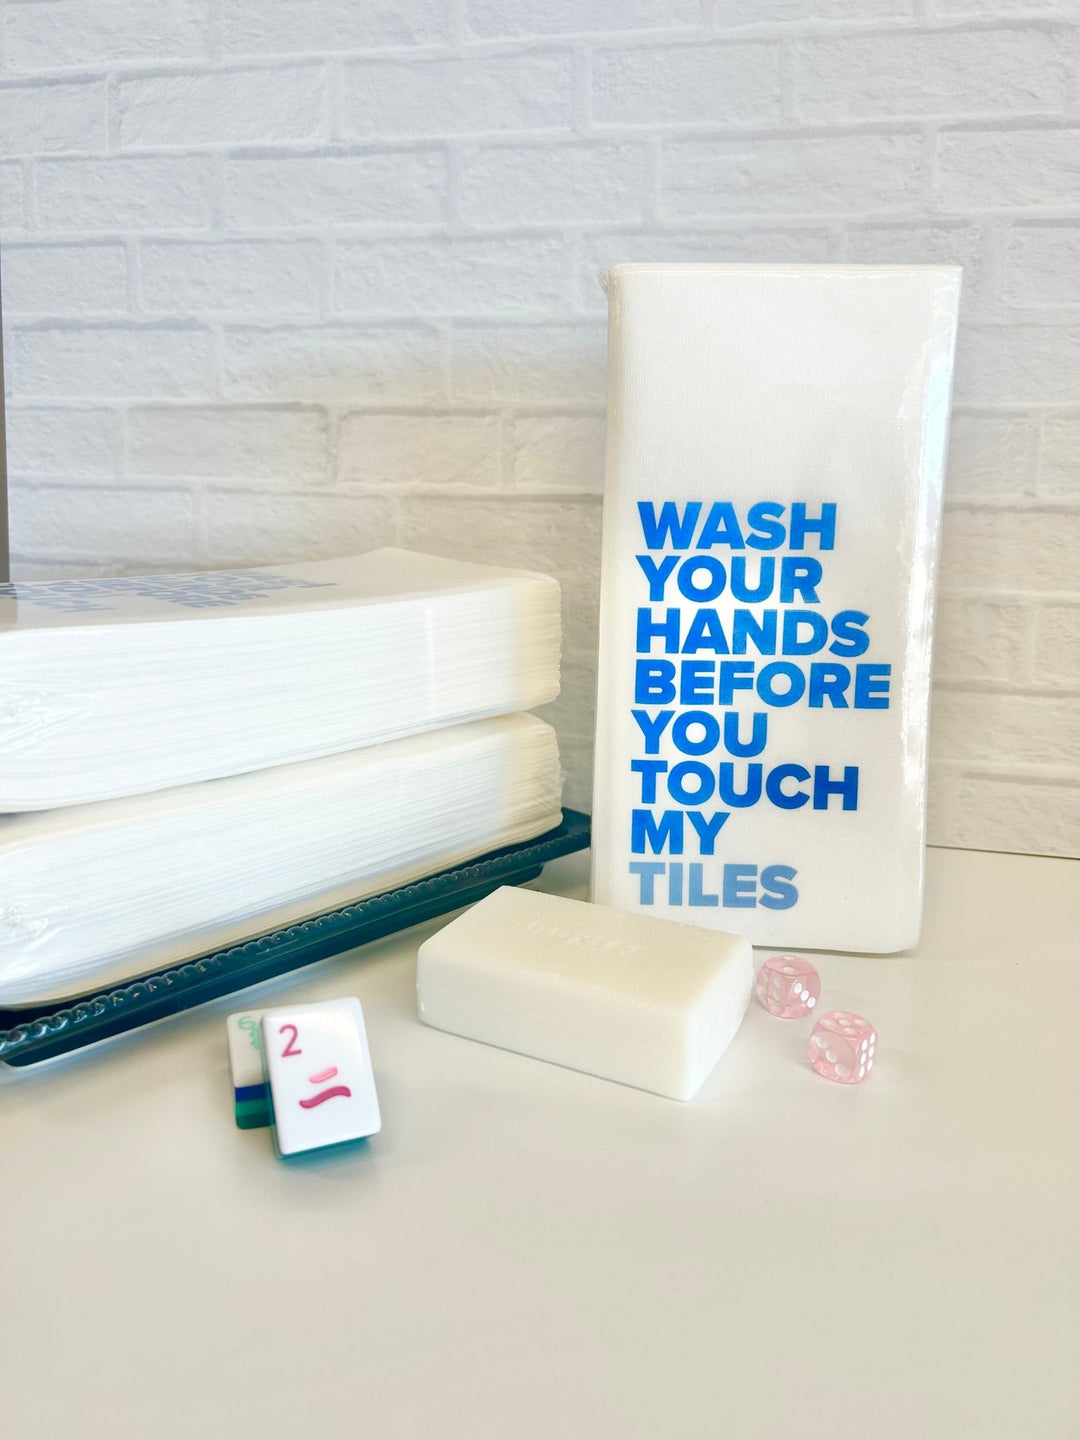 Guest Towel - Wash Your Hands - #Perch#